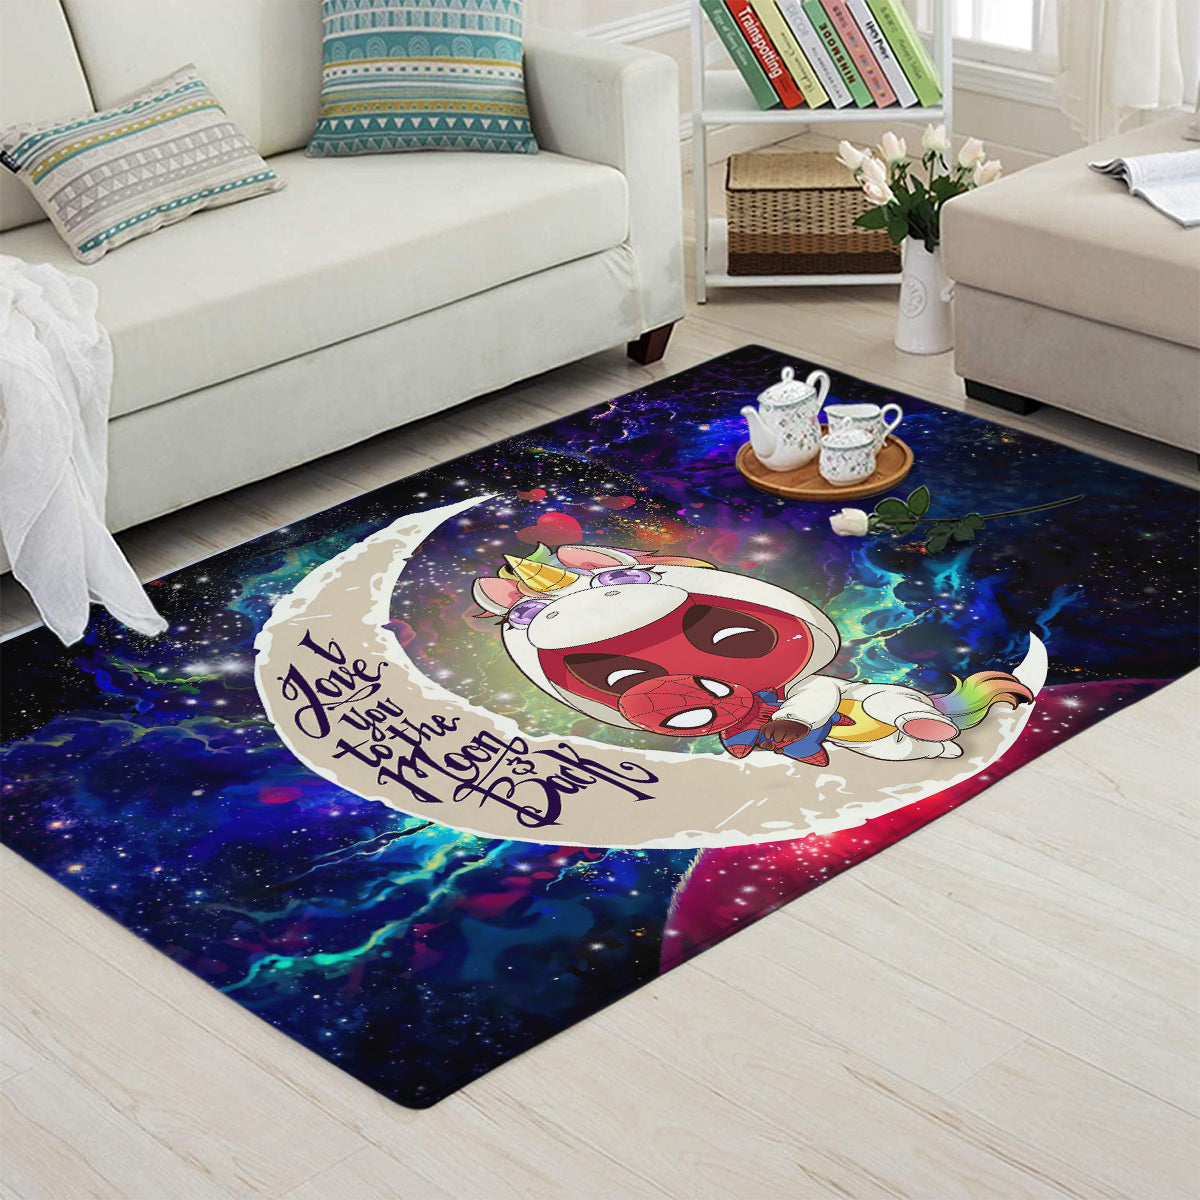 Unicorn Deadpool And Spiderman Avenger Love You To The Moon Galaxy Carpet Rug Home Room Decor